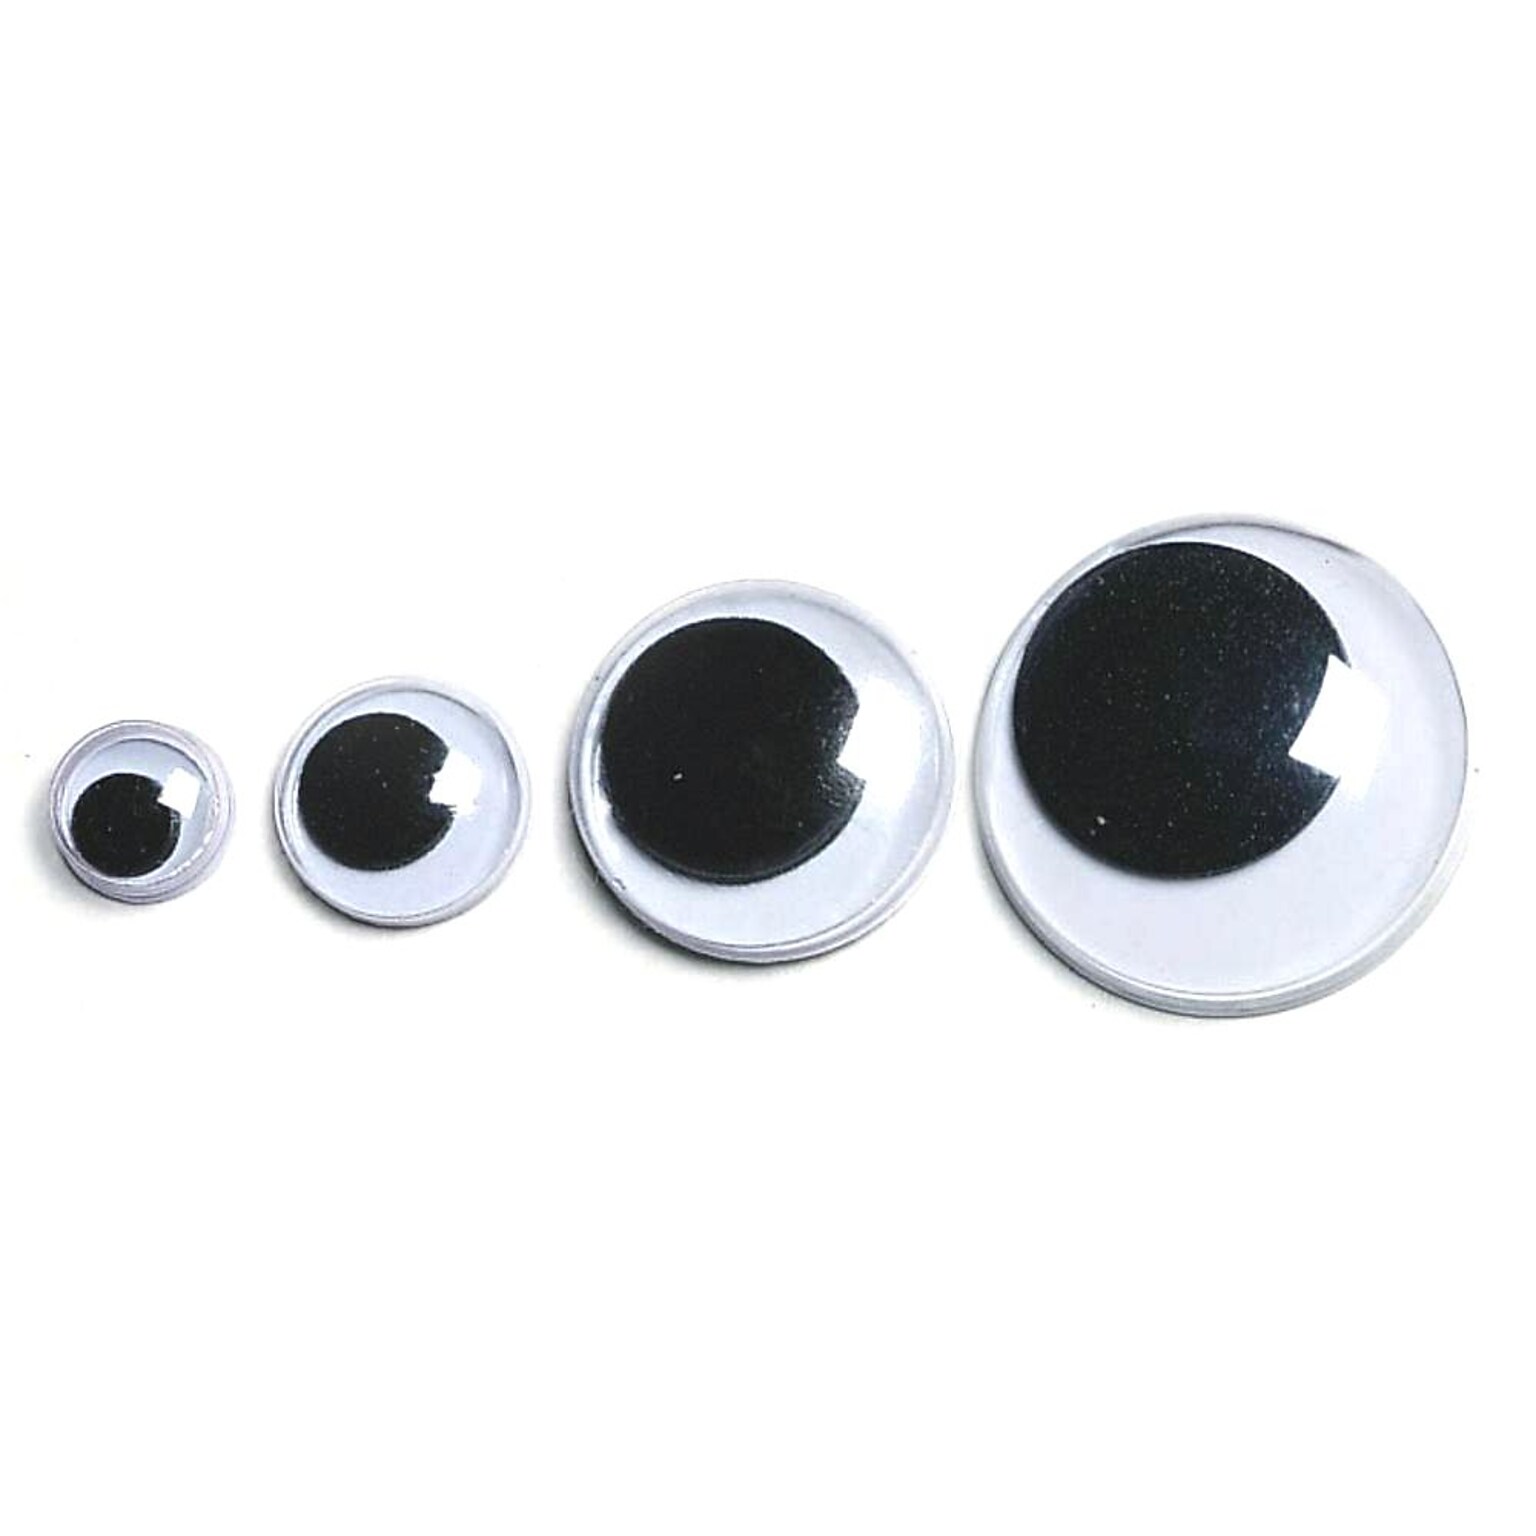 S&S 10 mm Wiggly Eyes, Craft Supplies (TR103)